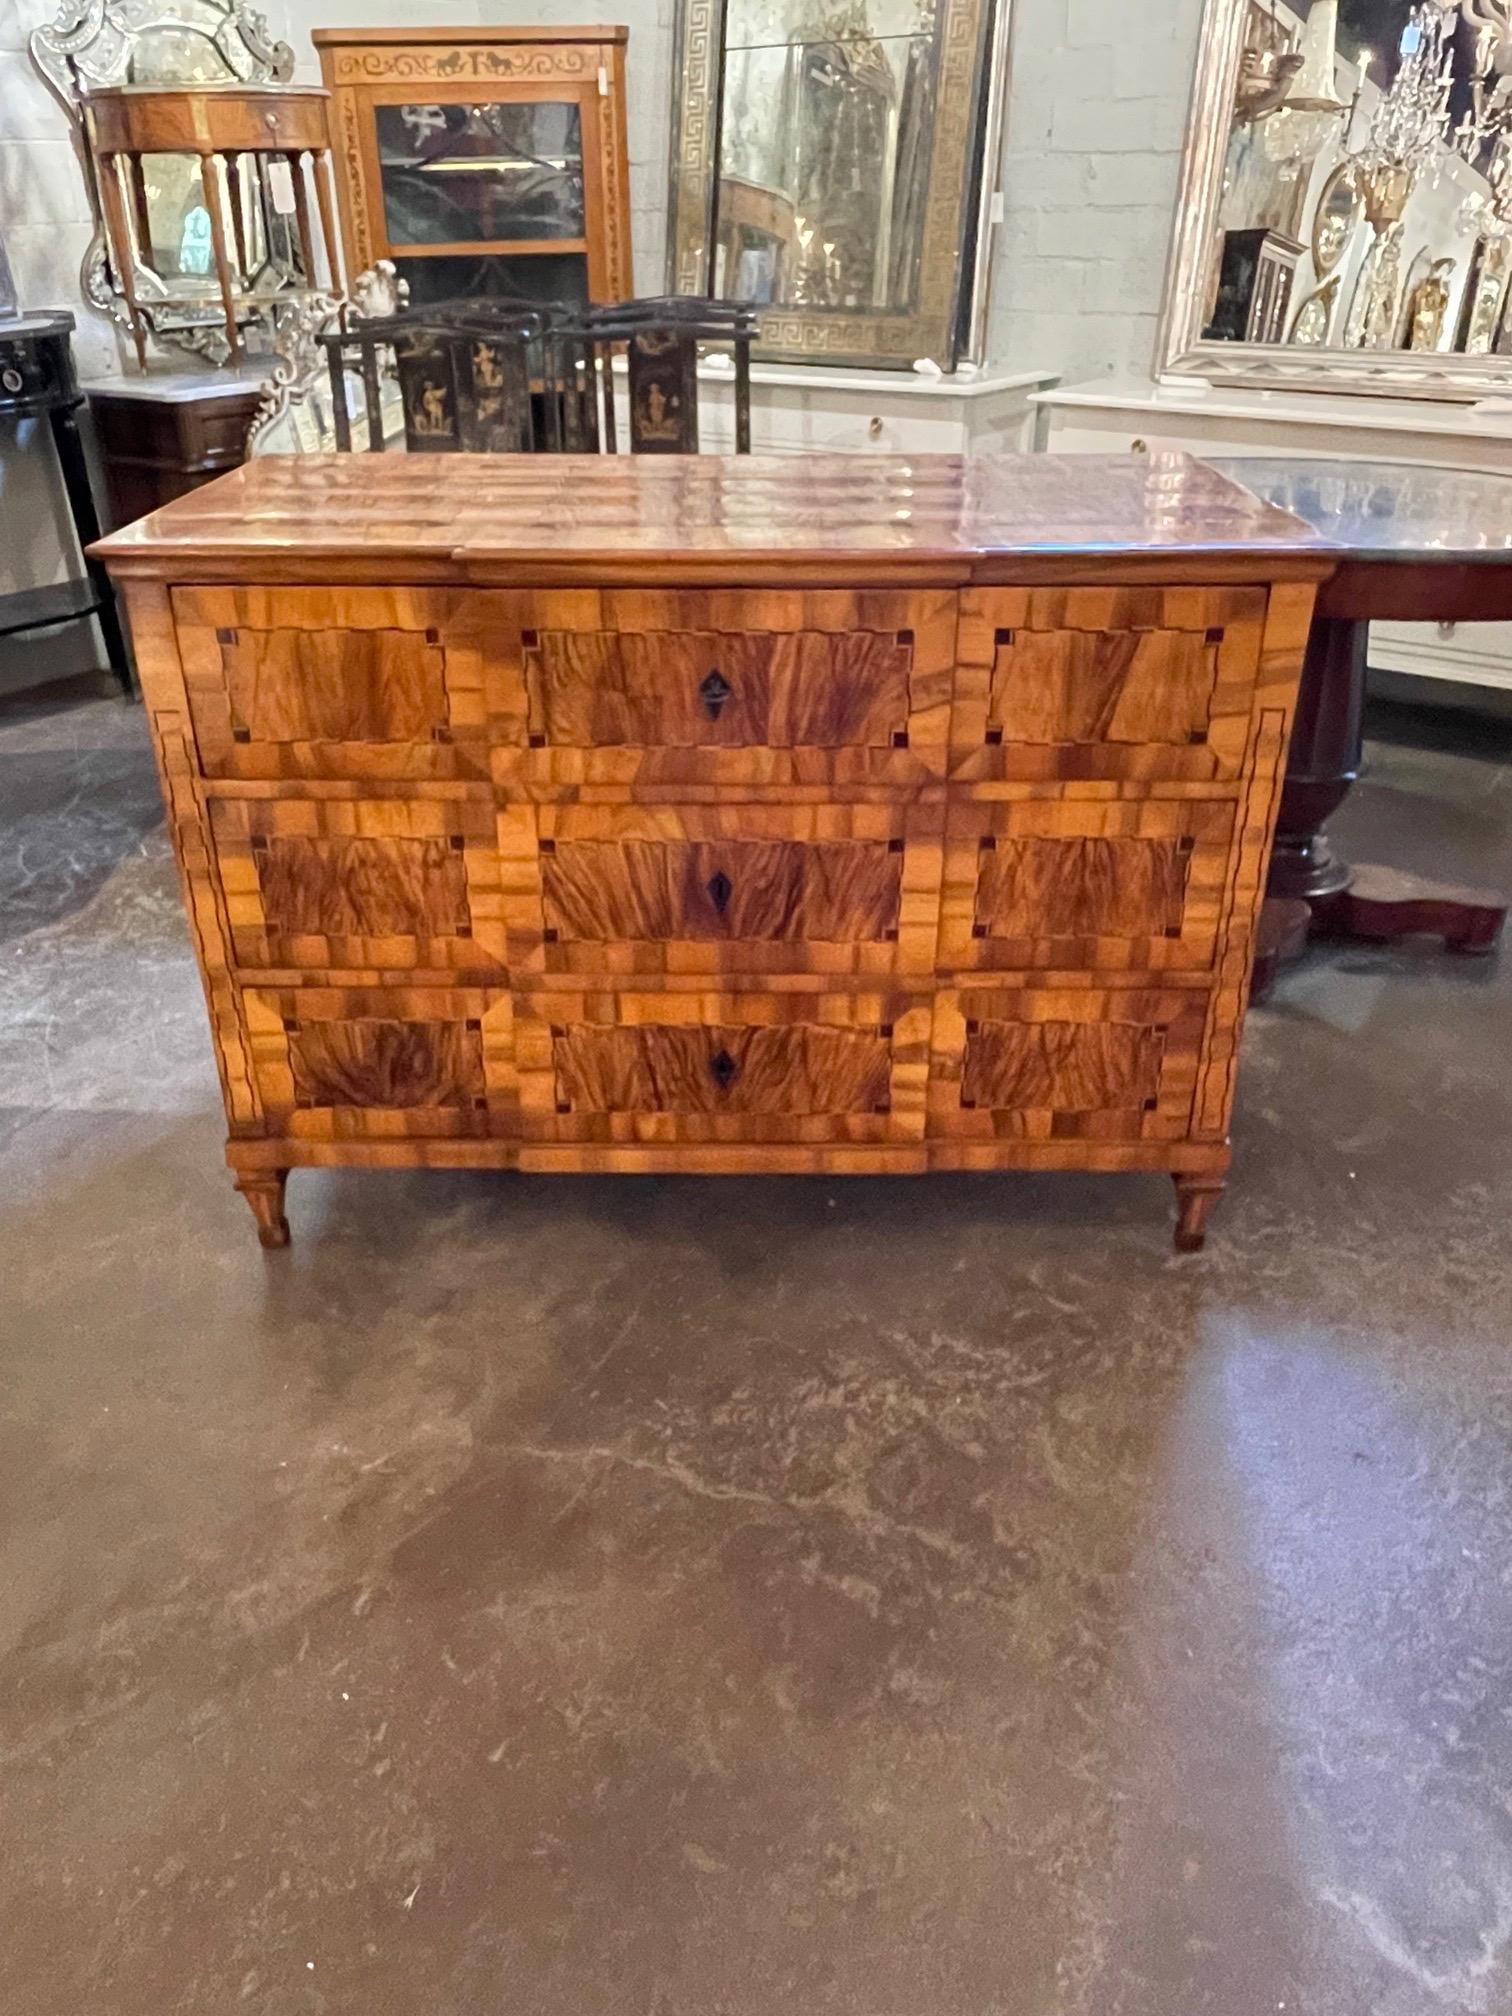 Gorgeous early 19th century German Biedermeier walnut commode with black walnut inlay. Beautiful polished wood with interesting pattern. An exceptional piece!